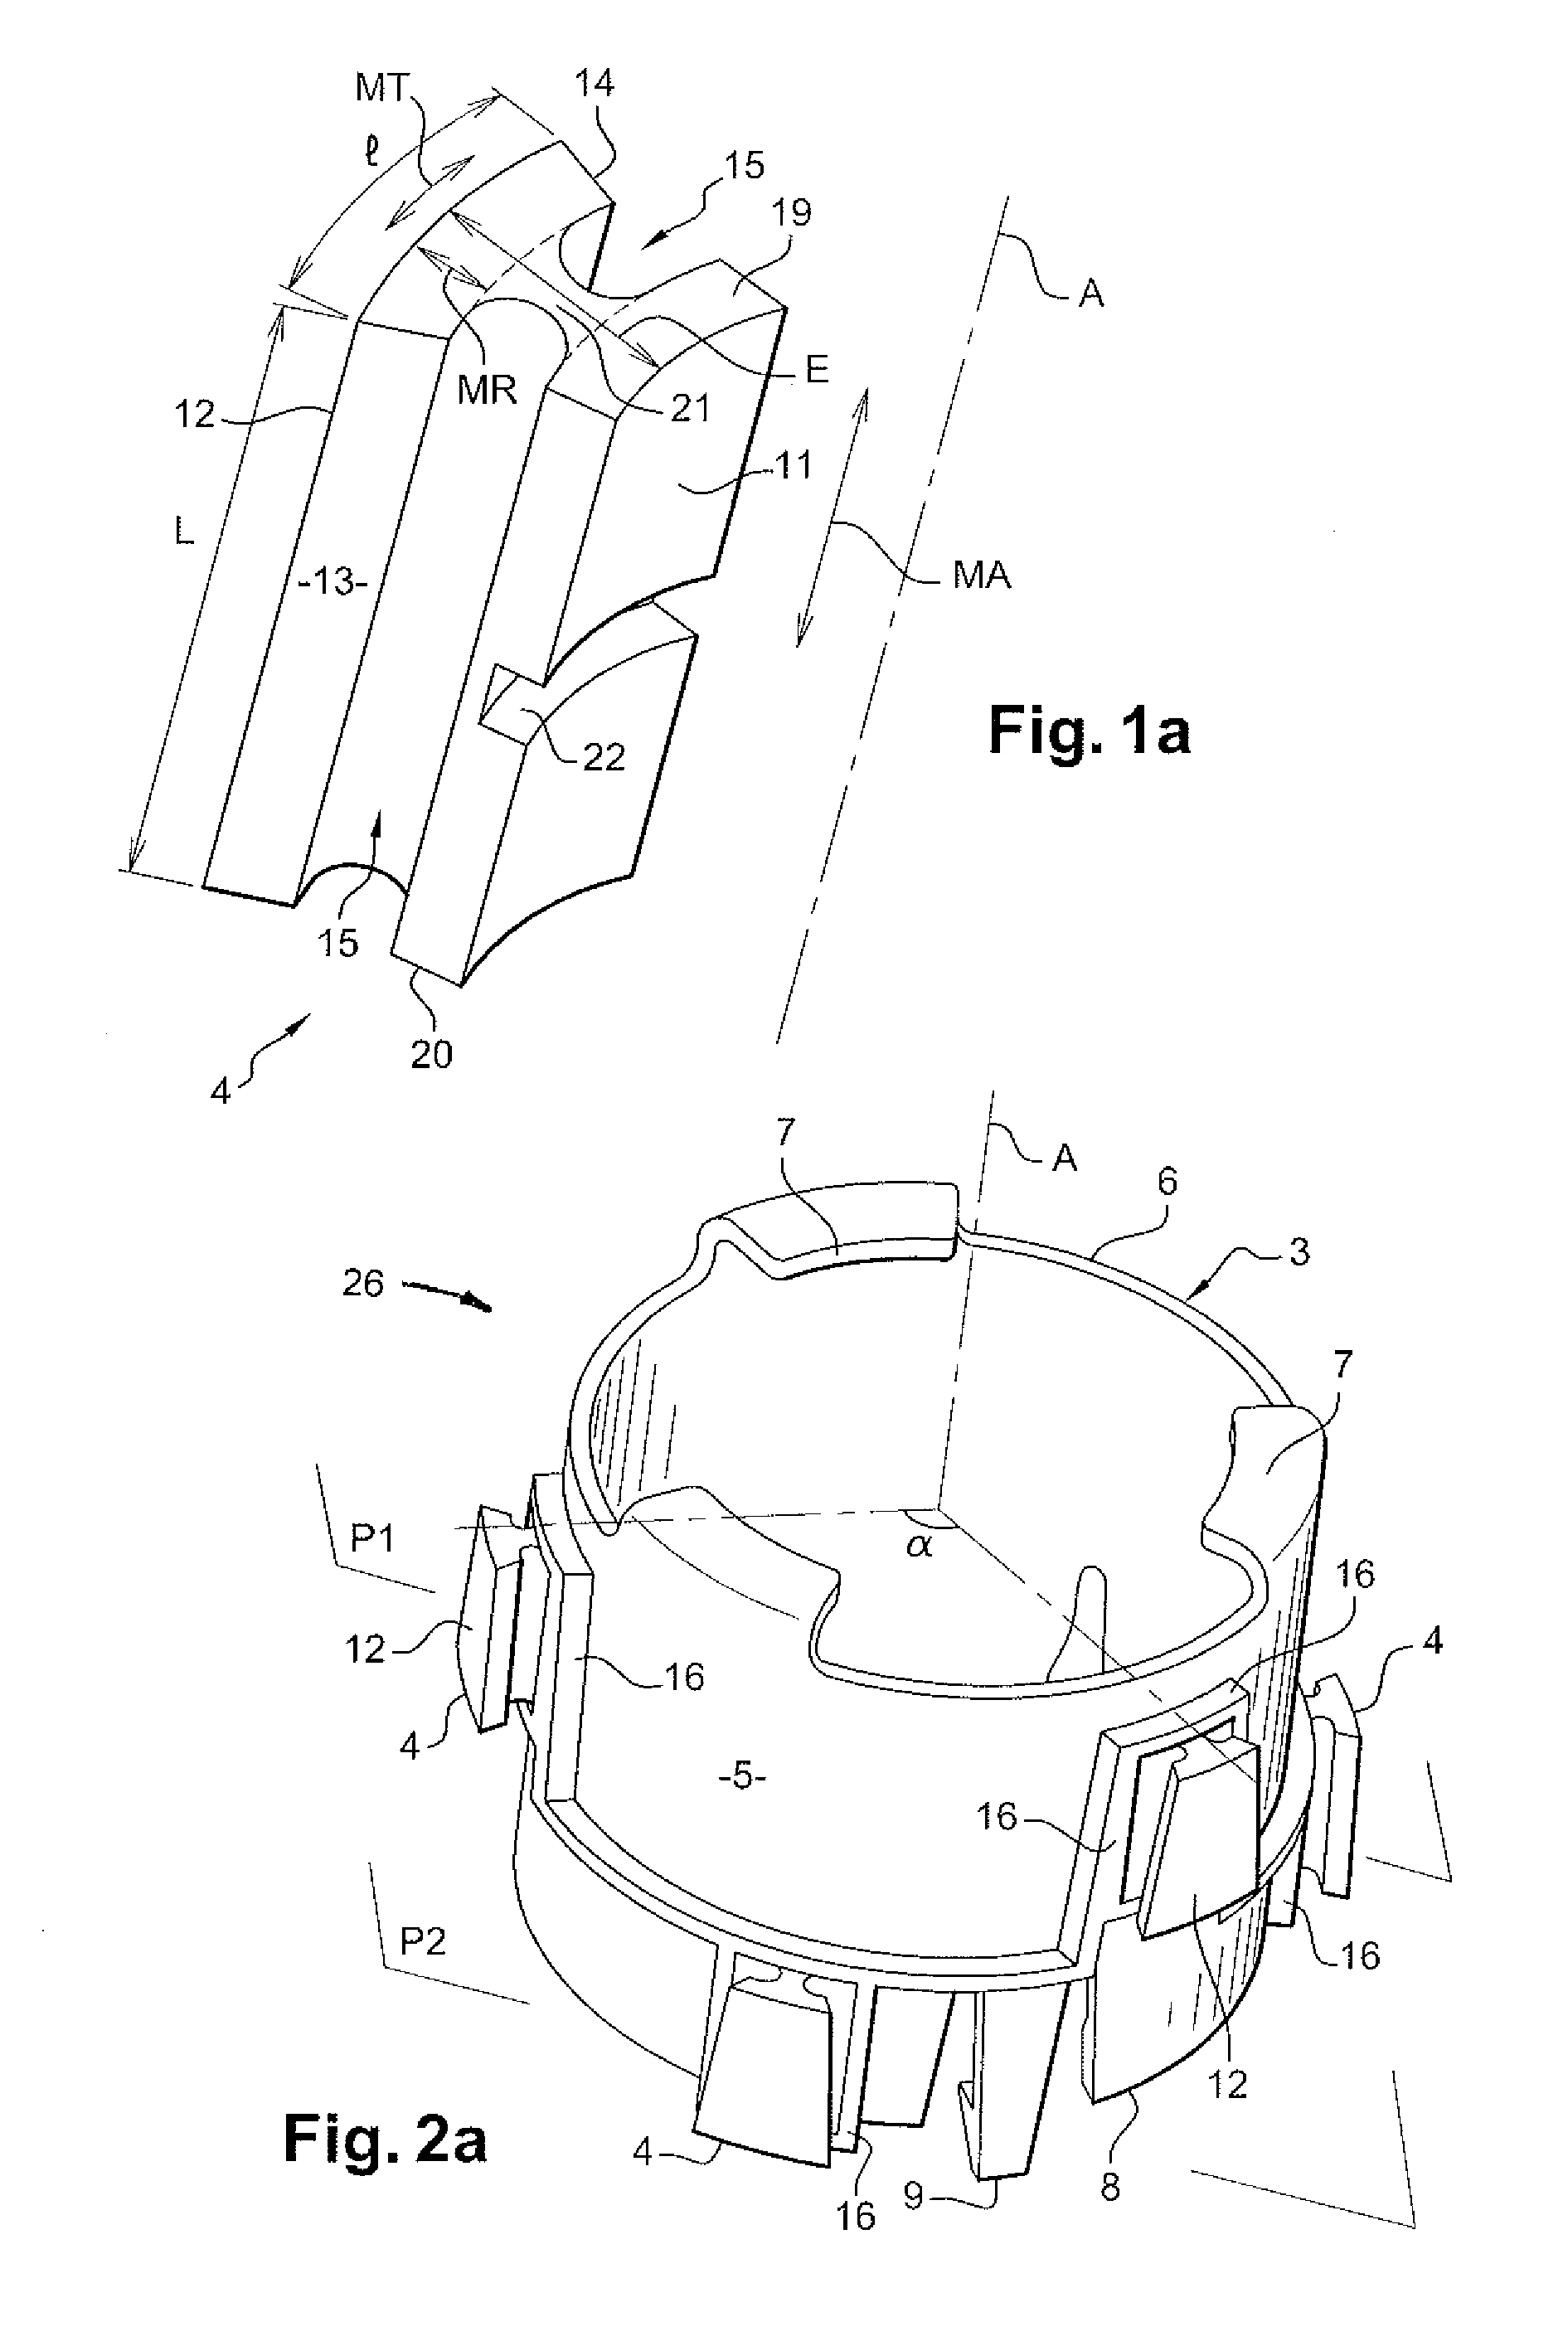 Motor support device for heating, ventilation and/or air-conditioning system